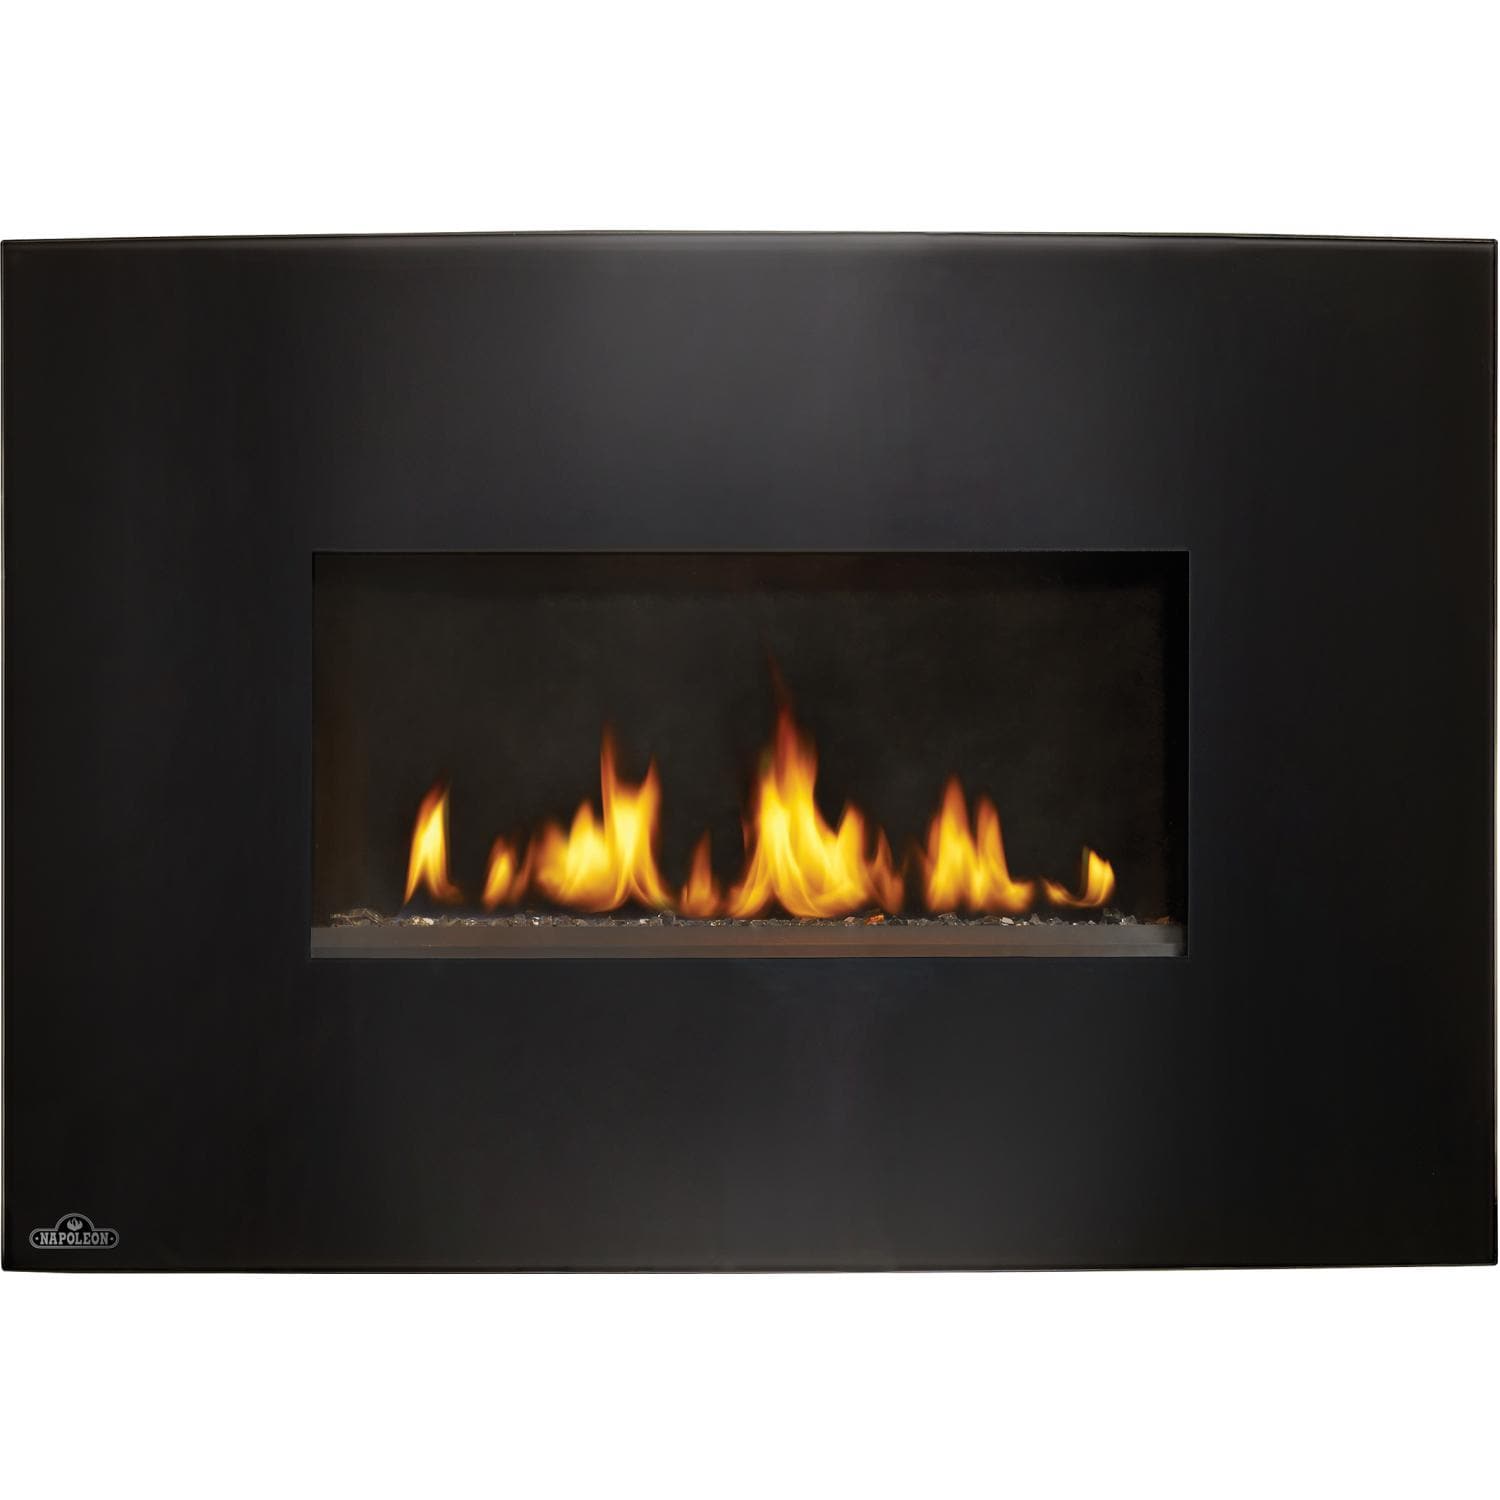 Napoleon Plazmafire 24-Inch Wall Mount Vent Free Propane Gas Fireplace W/ Electronic Ignition And Curved Glass Front - image 2 of 5